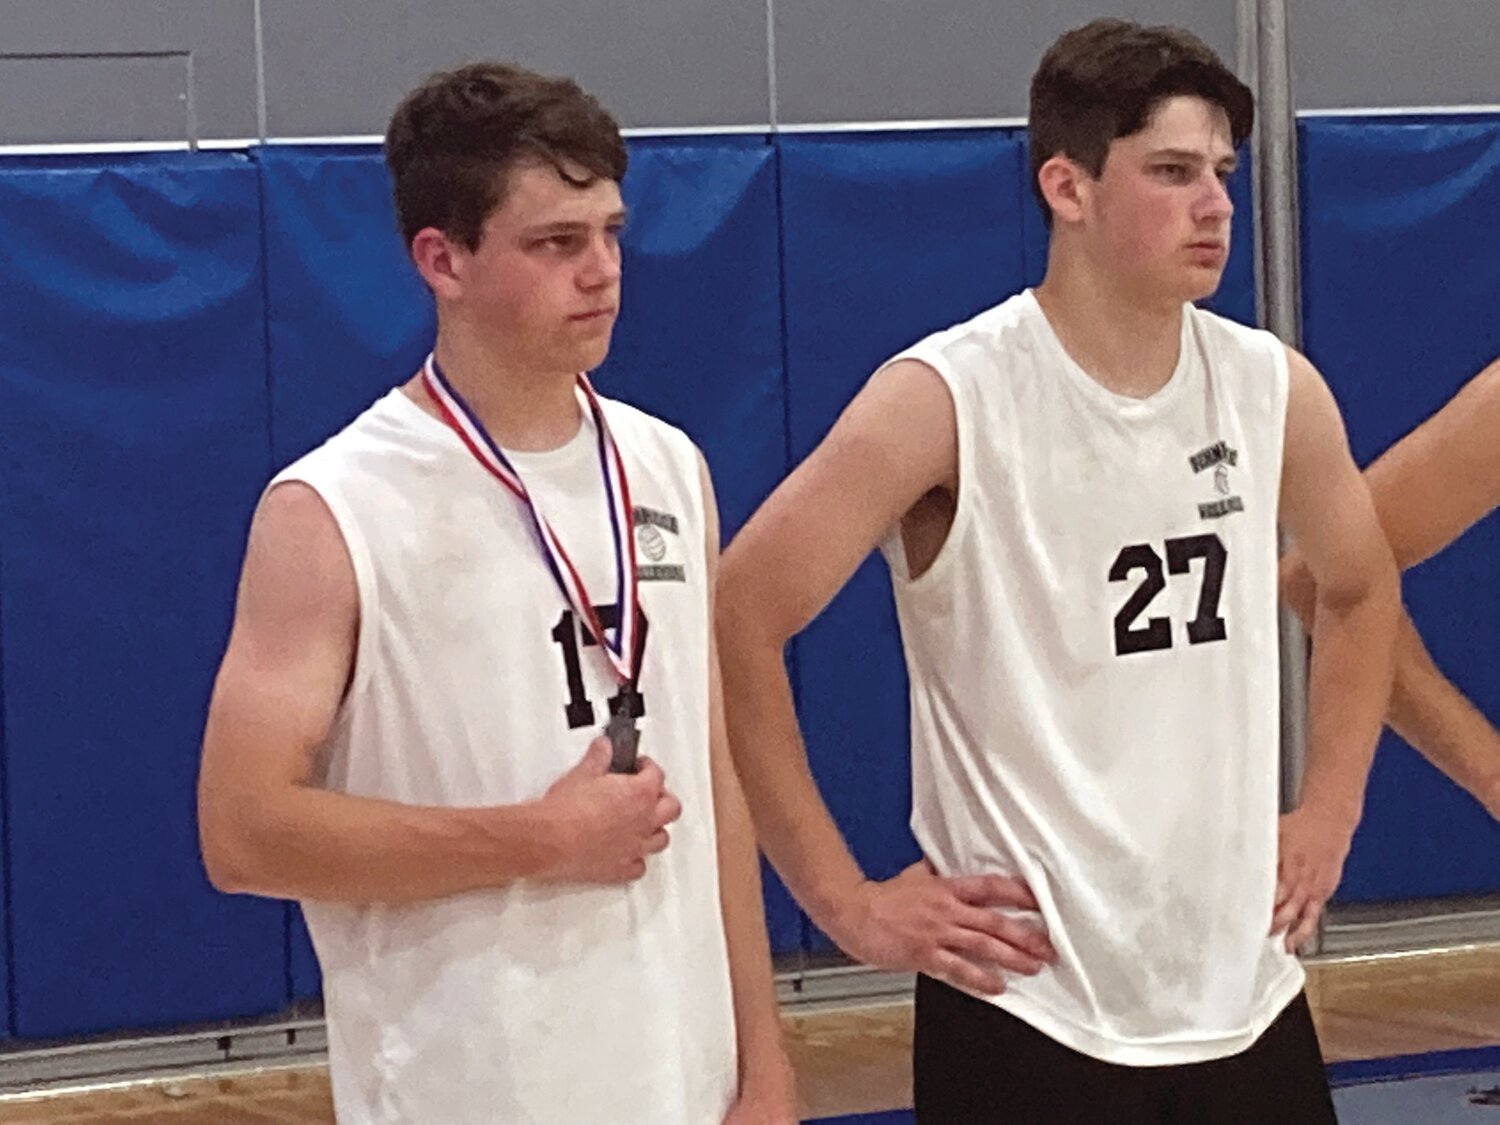 Disappointed Pennridge volleyball players Evan Jalosinski, left, with second-place medal, and Logan Jalosinski after the District One championship match loss to Upper Dublin.